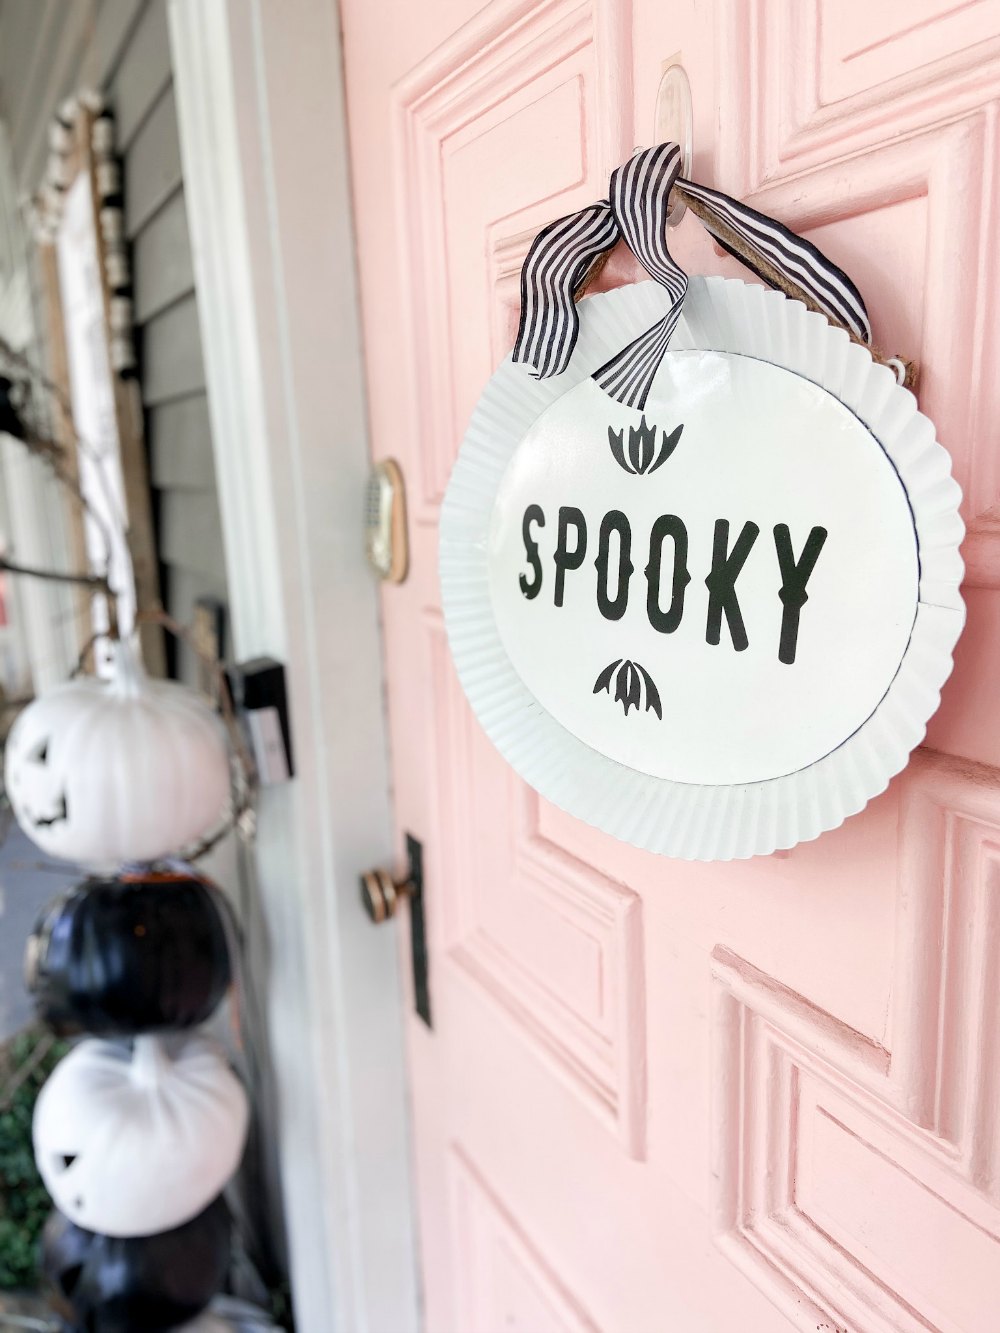 Halloween DIY Spooky Forest Porch. Add some branches, crows and moss to create an easy "spooky" forest for Halloween! 